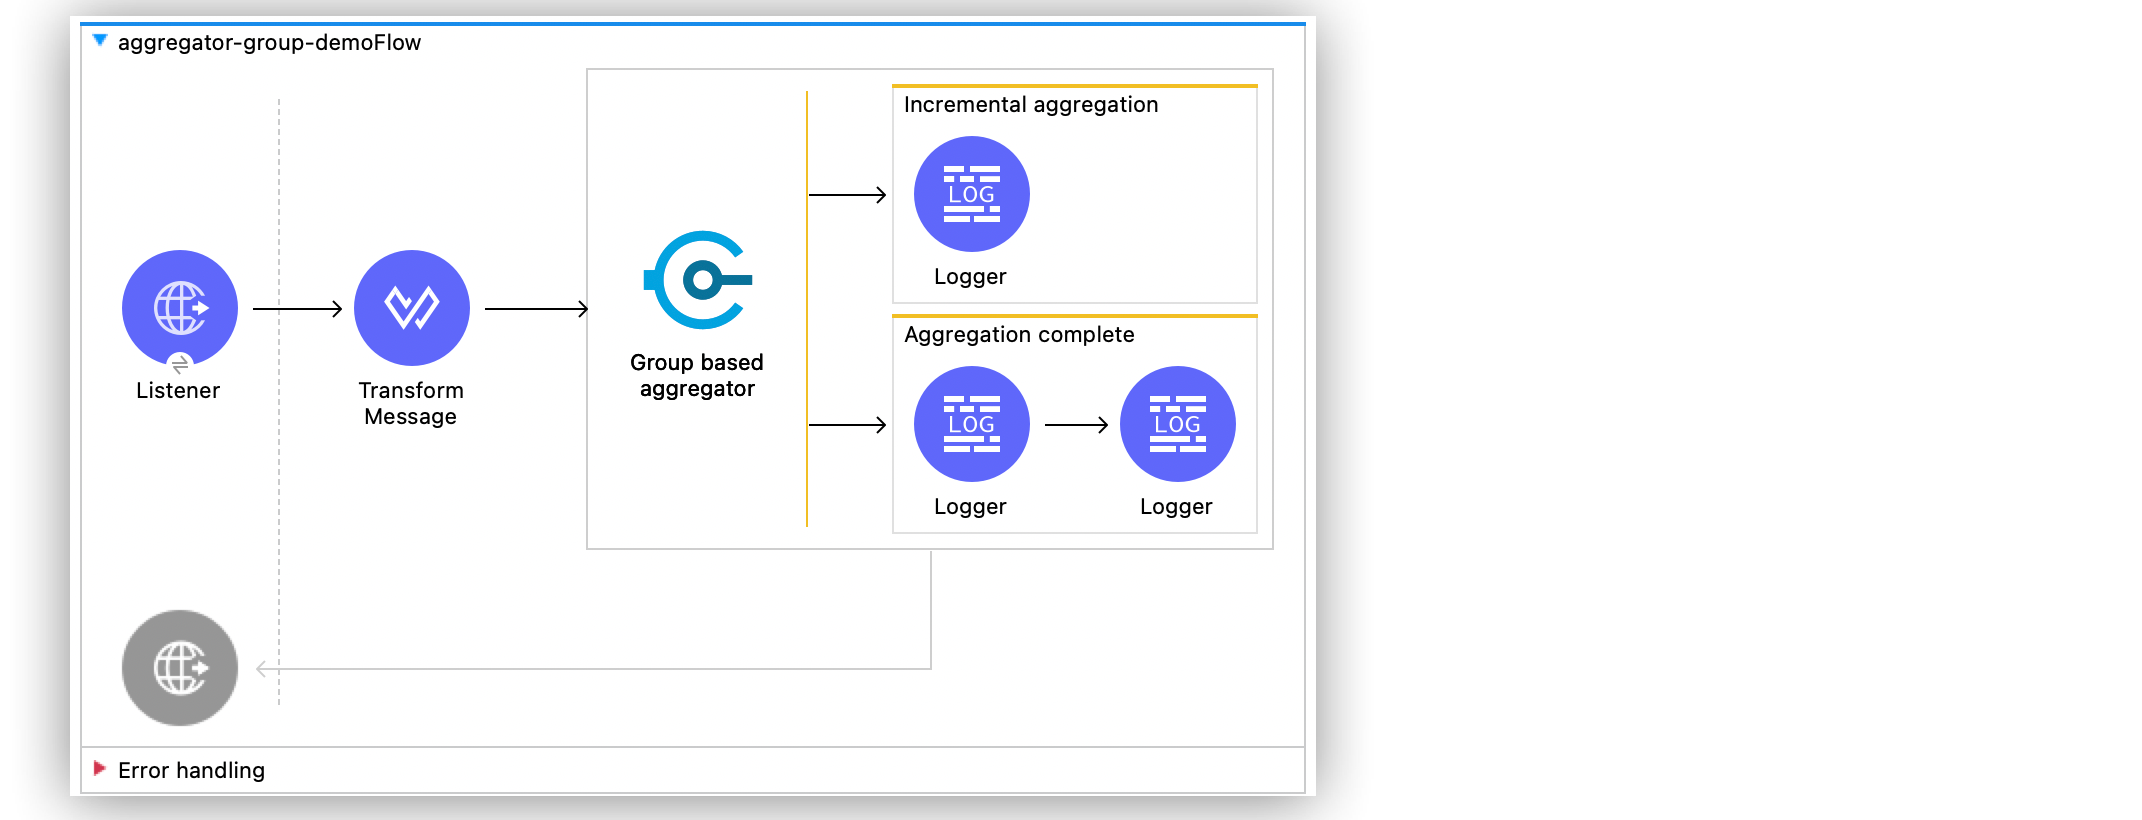 Group-Based Aggregator Flow Example in Anypoint Studio Canvas